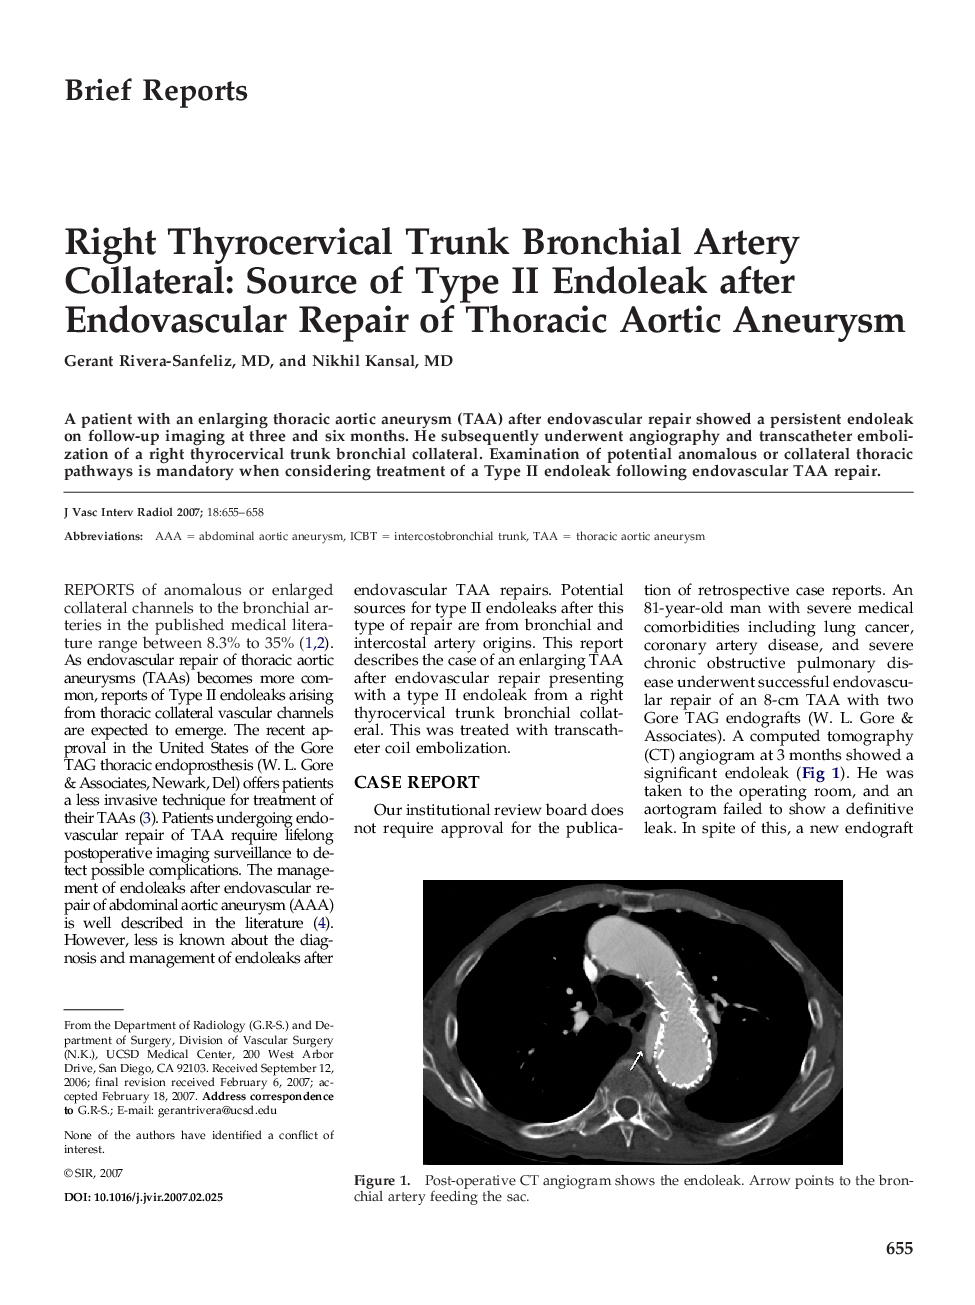 Right Thyrocervical Trunk Bronchial Artery Collateral: Source of Type II Endoleak after Endovascular Repair of Thoracic Aortic Aneurysm